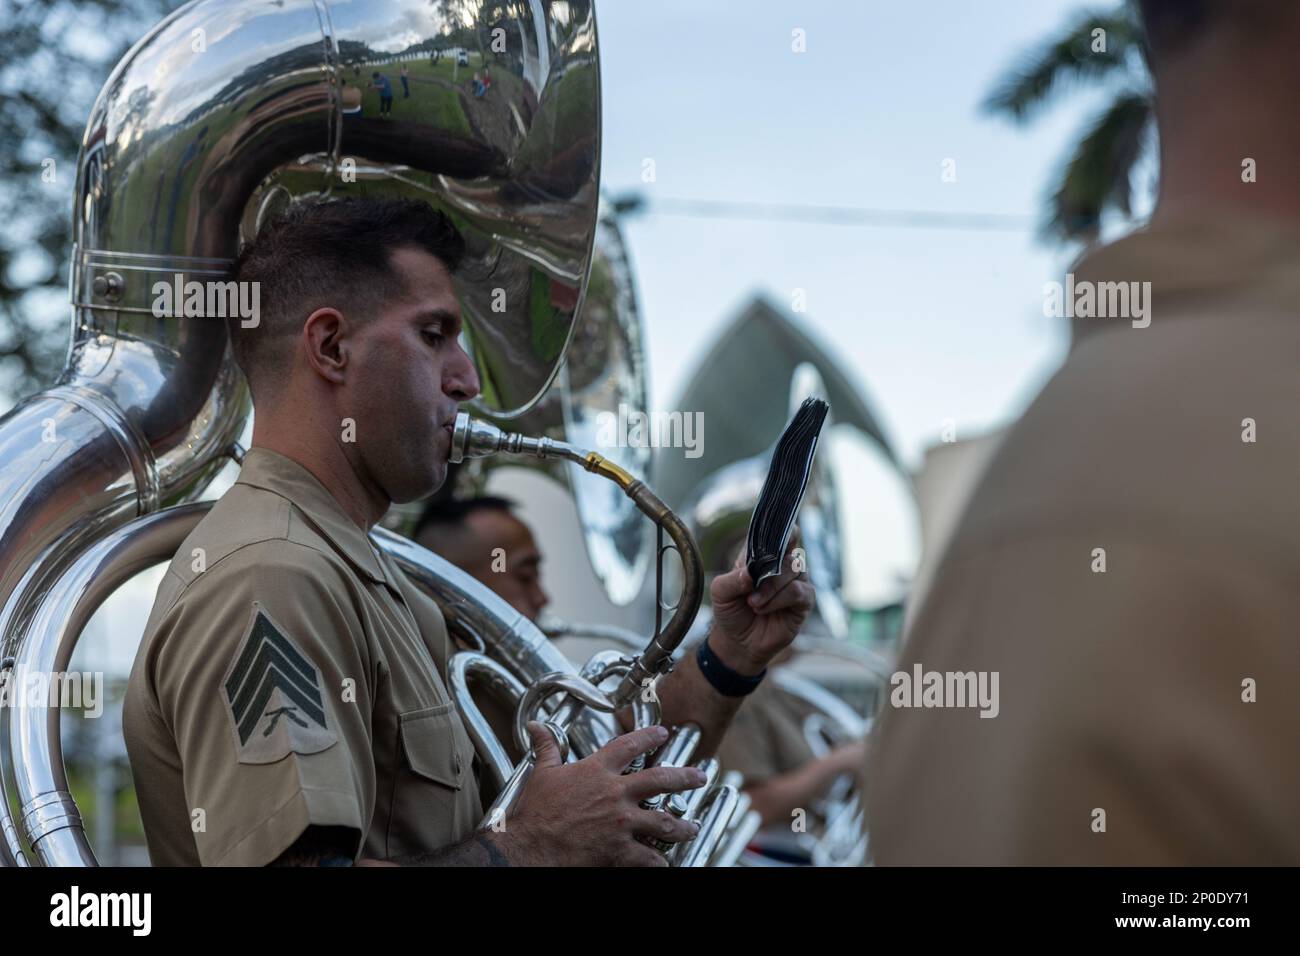 A U.S. Marine performs for attendees during a live concert for the local community at Plaza de Espana, Hagatna, Guam, Jan. 23, 2023. The MARFORPAC Band participated in multiple community engagements during their visit to Guam as part of the Naval Support Activity, Marine Corps Base Camp Blaz Reactivation and Naming Ceremony. In order to encourage music education and showcase the vibrant history and tradition of military music, the band is active in providing clinics and concerts for the communities they serve. The MARFORPAC Band performs throughout the Indo-Pacific at more than 400 commitments Stock Photo